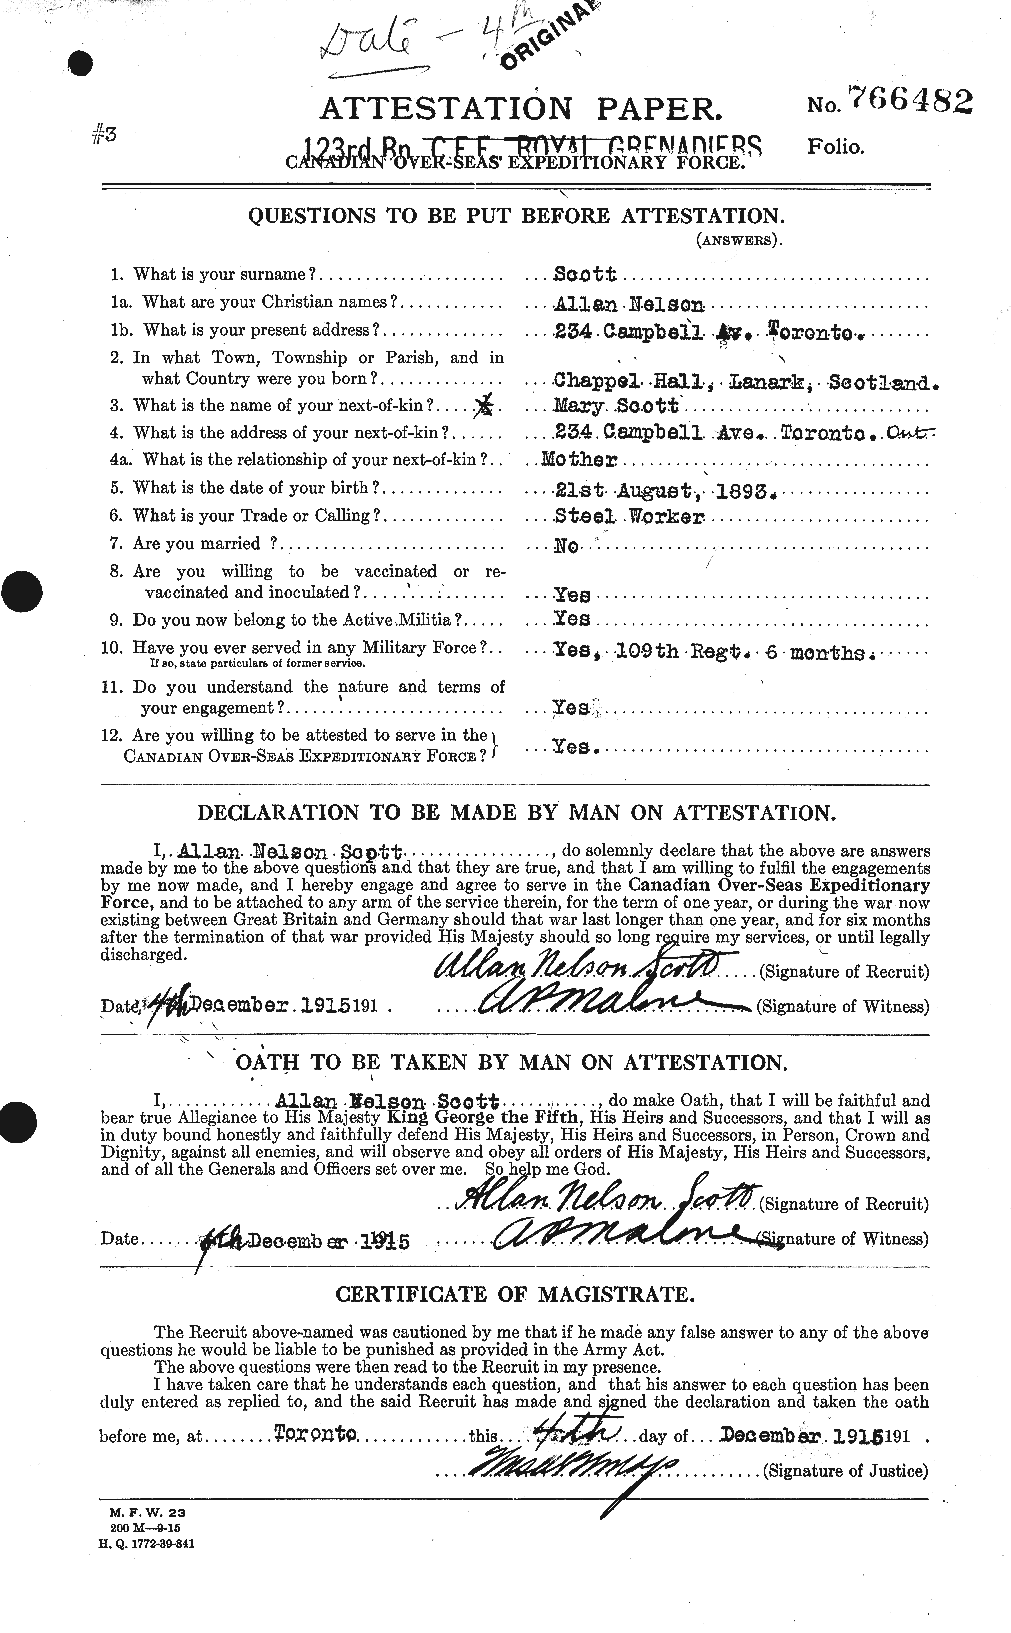 Personnel Records of the First World War - CEF 086574a